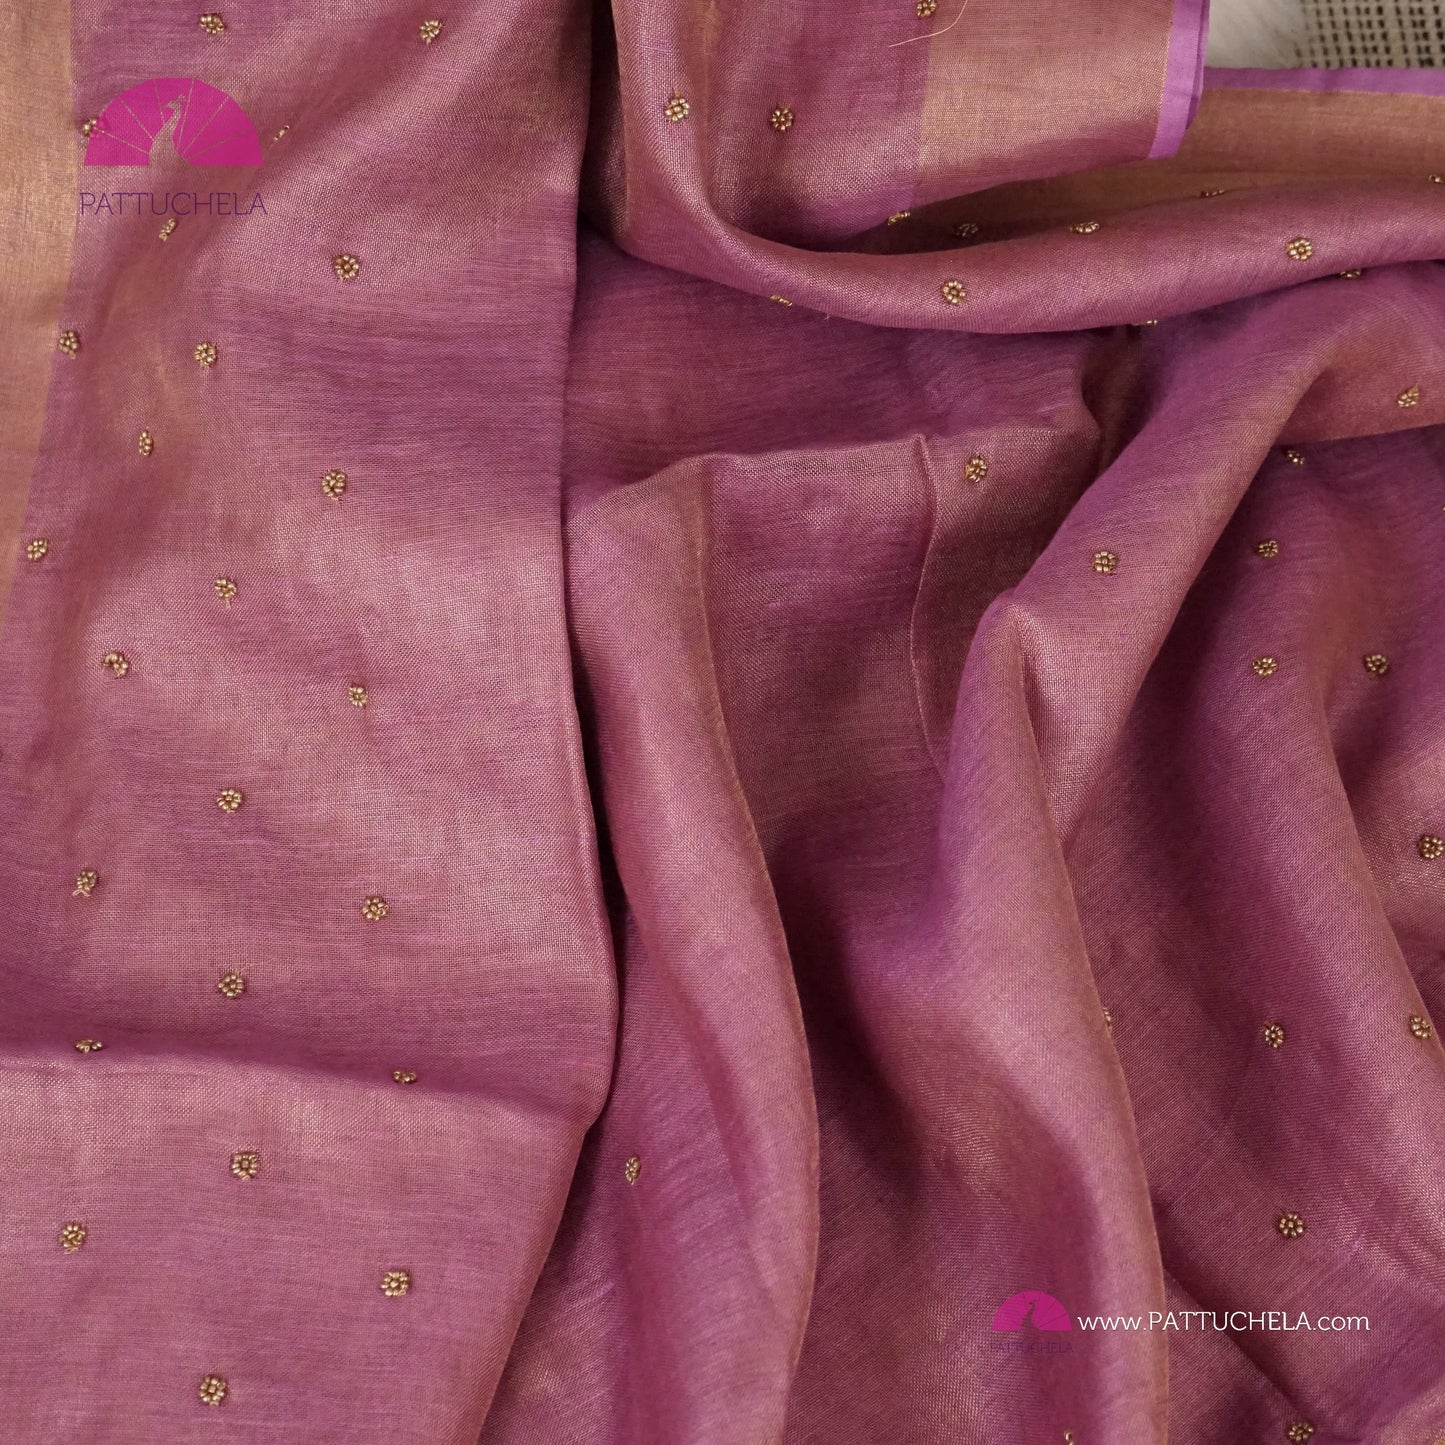 Organic Tissue Linen Saree in Pastel Lavender Color with Hand Embroidery